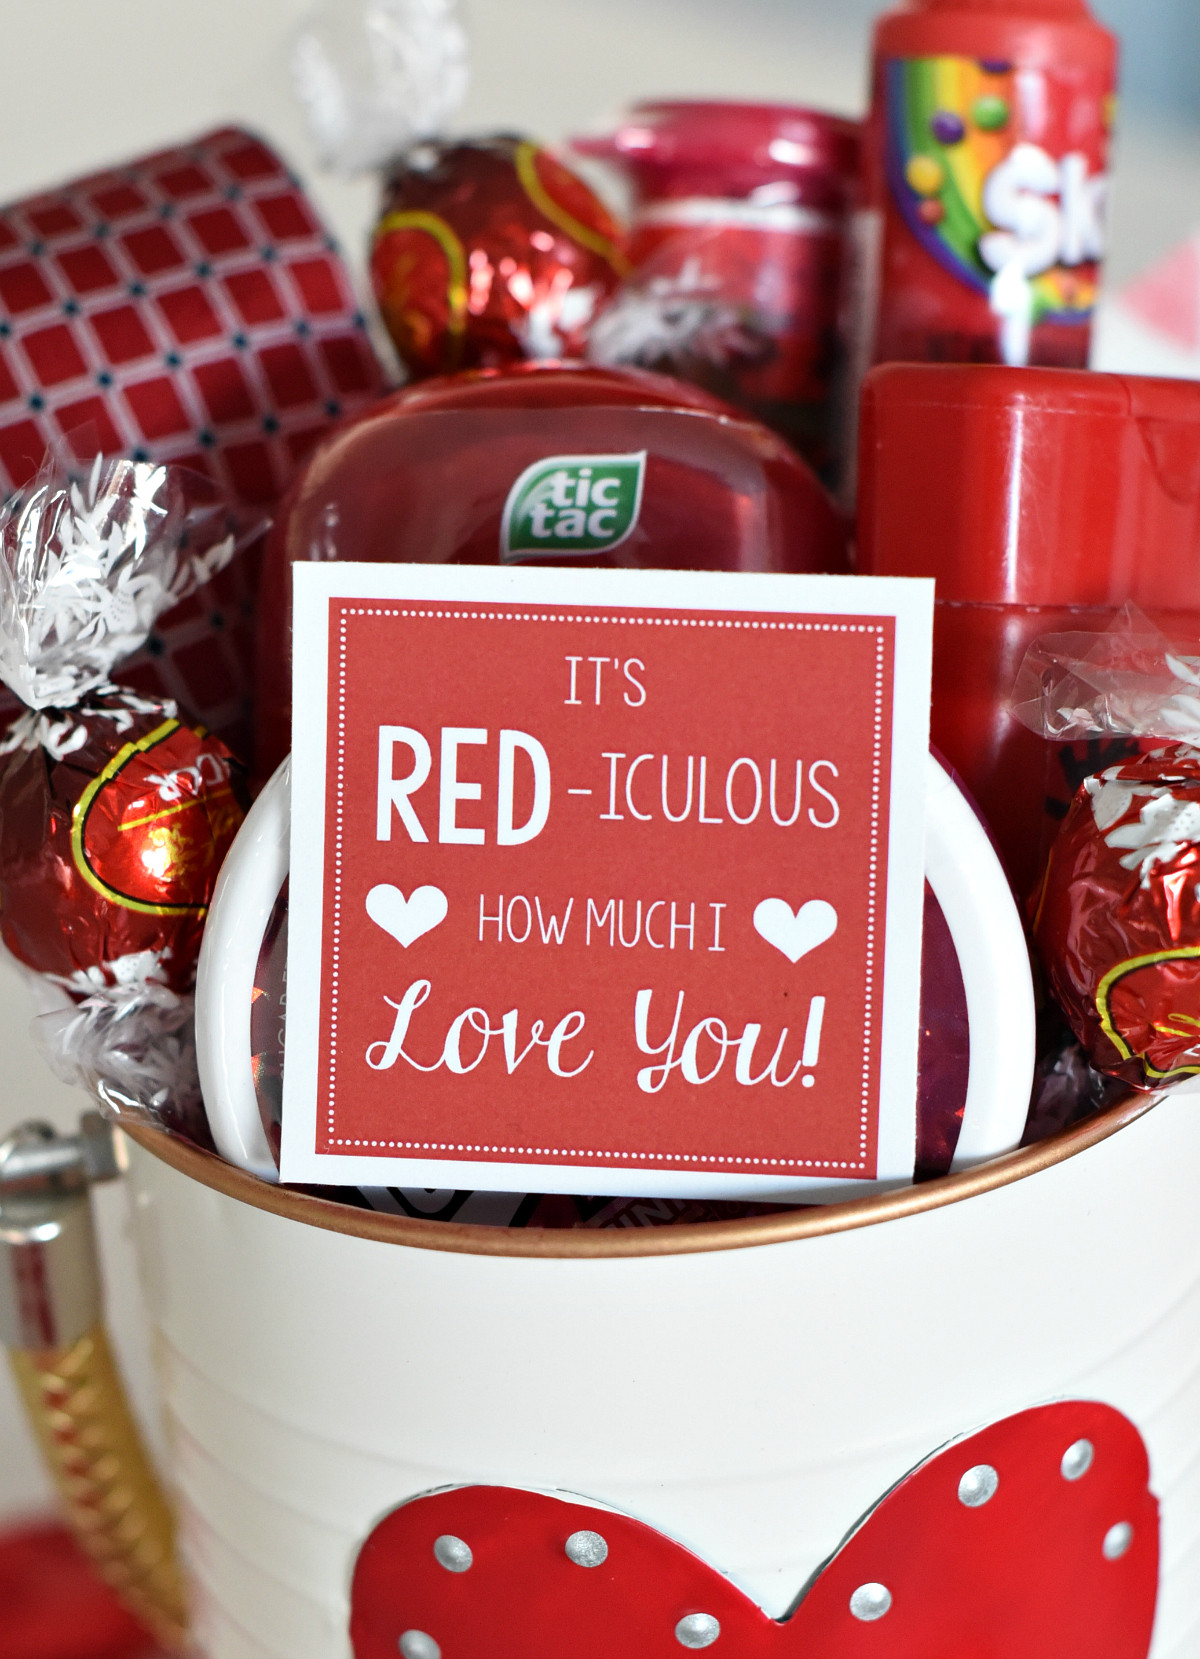 New Relationship Valentines Gift Ideas
 Cute Valentine s Day Gift Idea RED iculous Basket